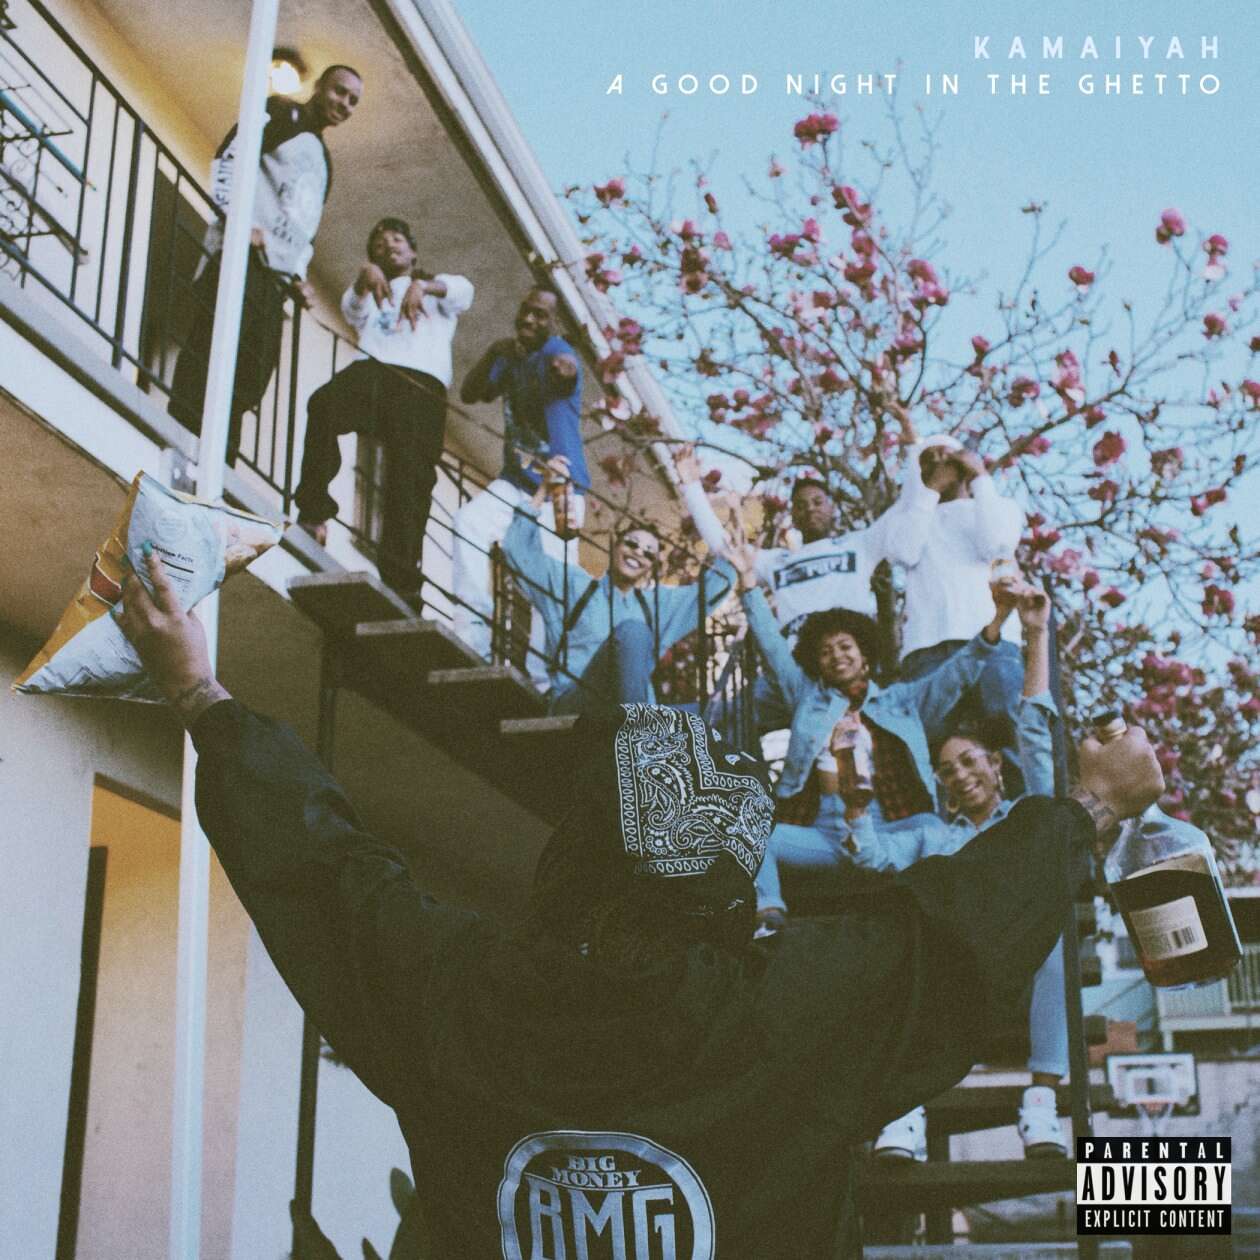 Kamaiyah, A Good Night in the Ghetto, Best Albums of 2016